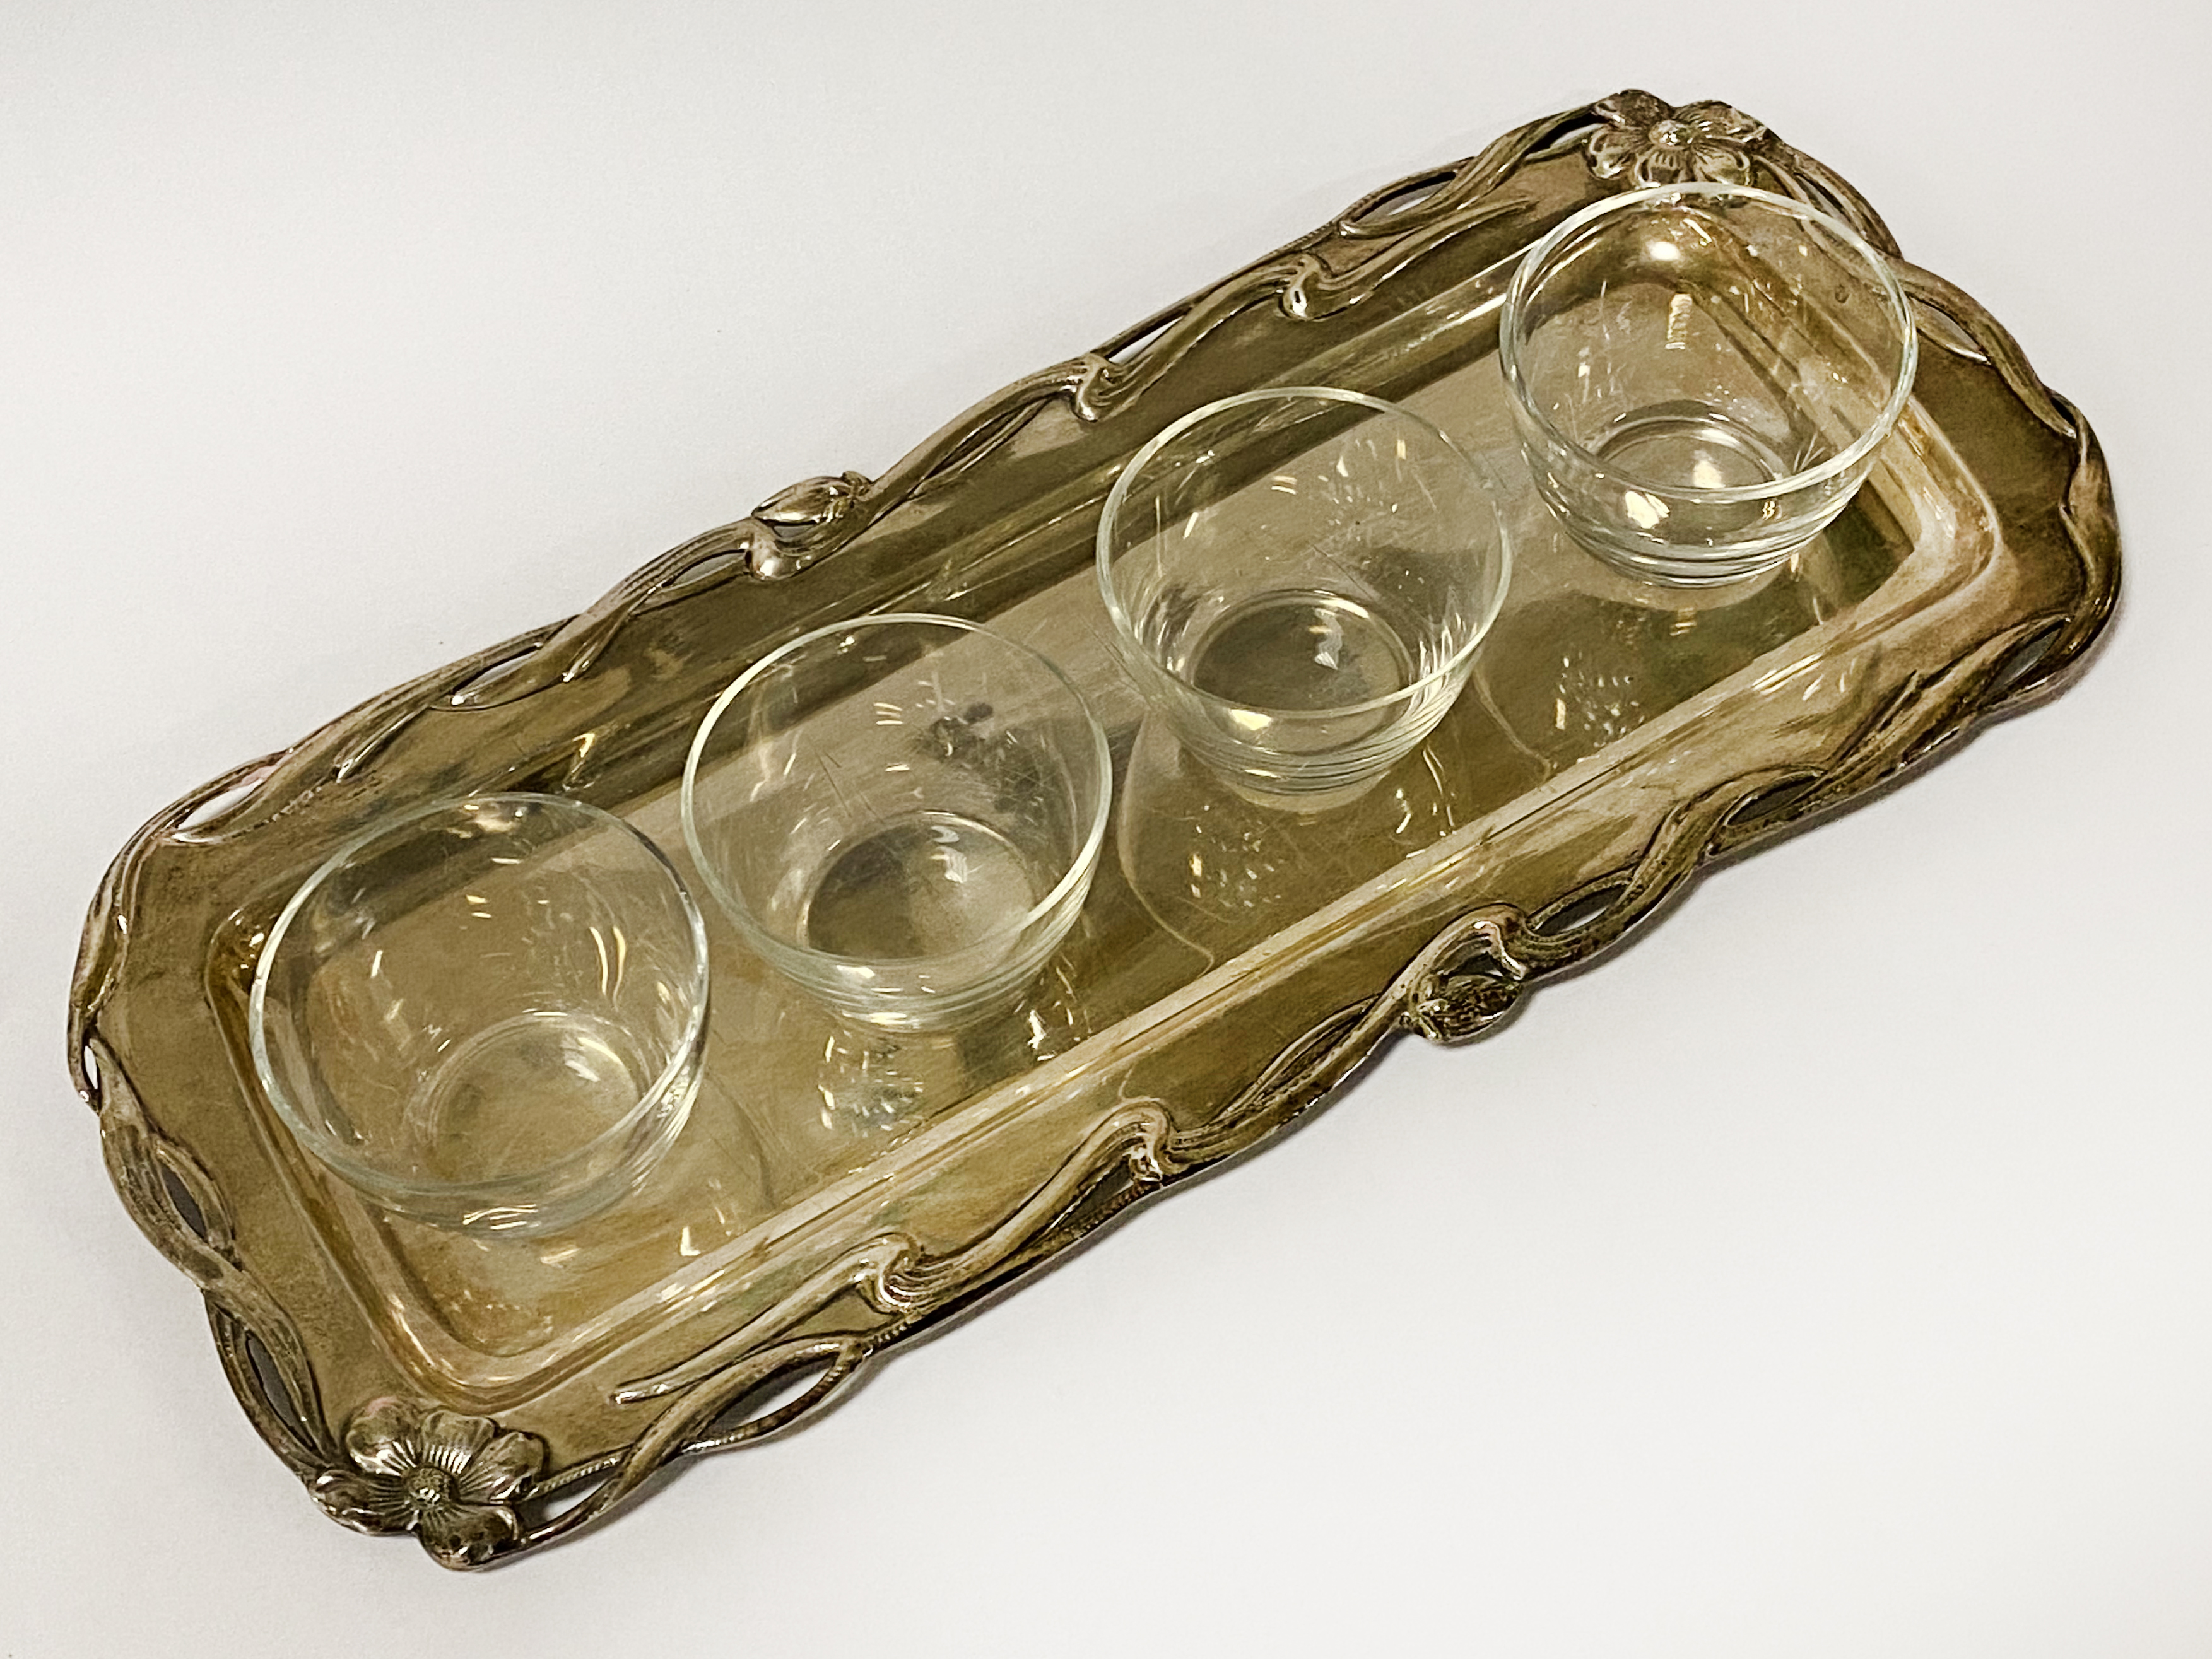 ORNATE SILVER TRAY AND GLASS CUPS - 244 GRAMS